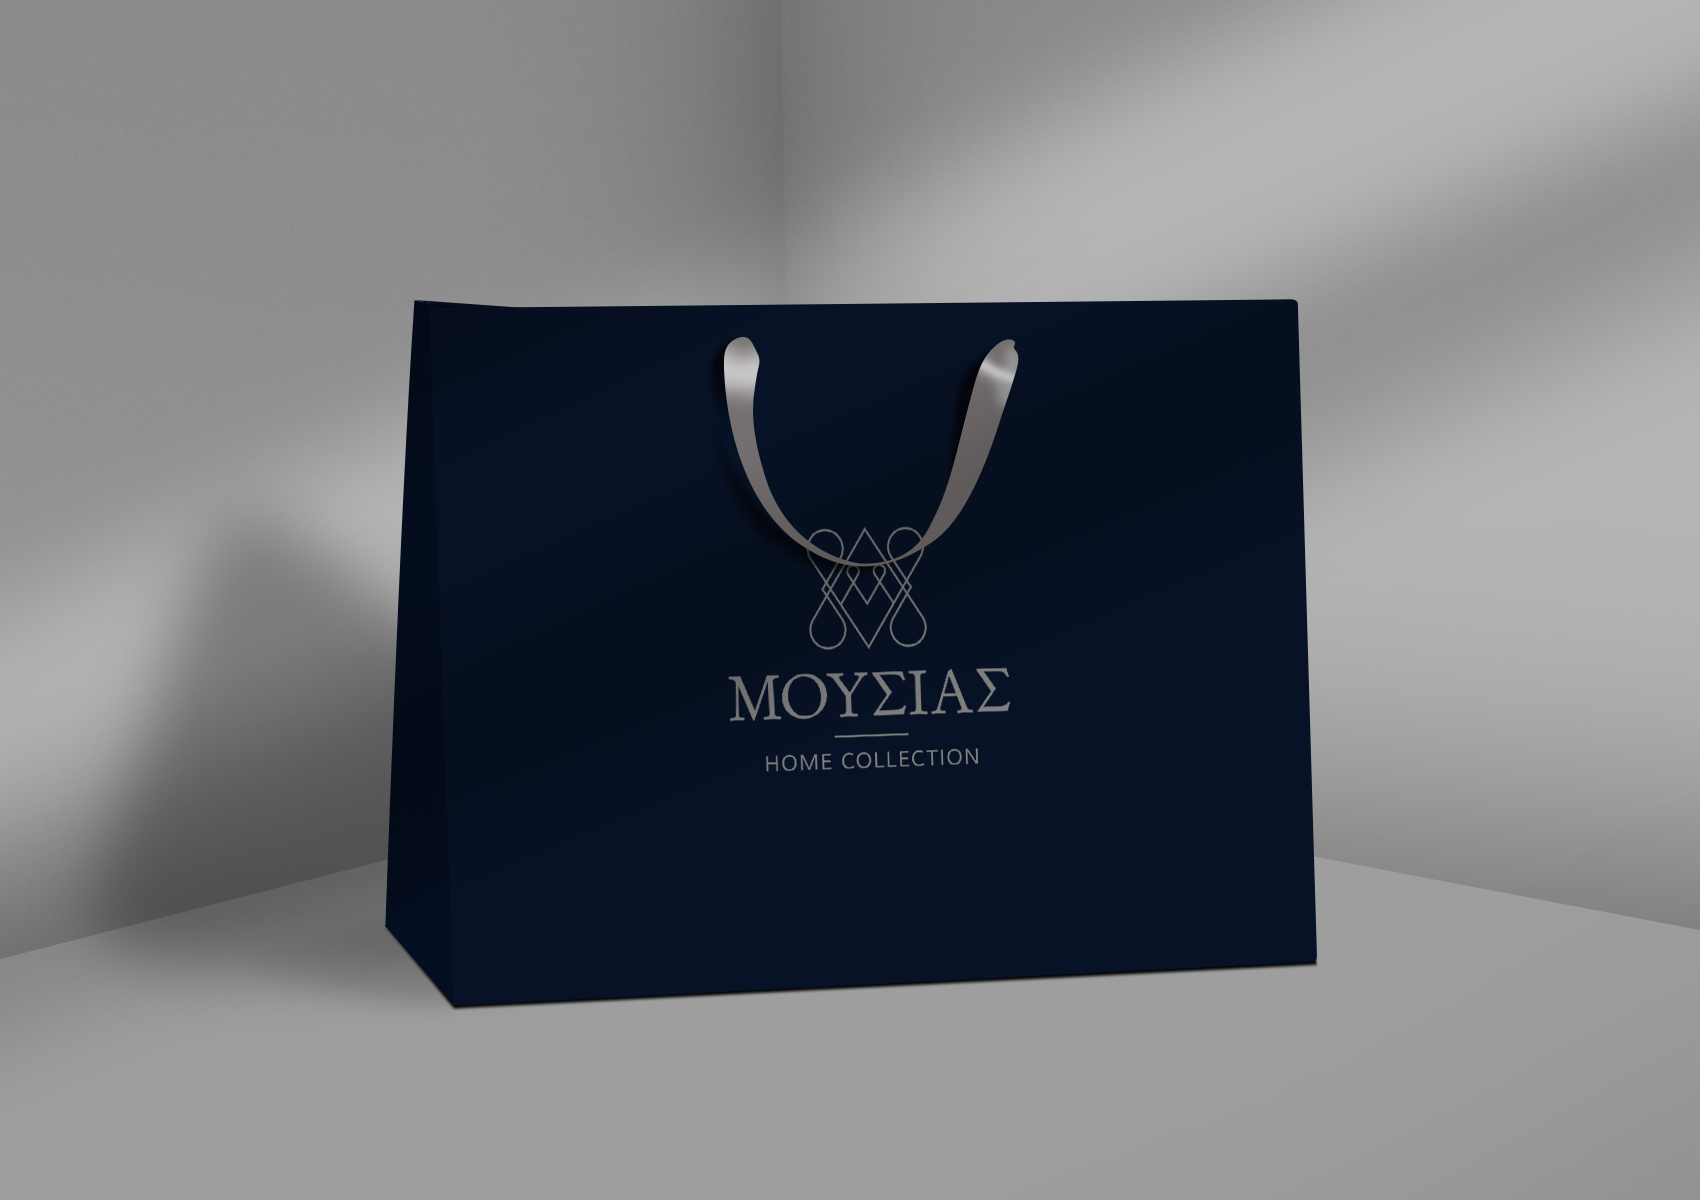 Moussias Home Collection shopping bag 1700x1200 by xhristakis